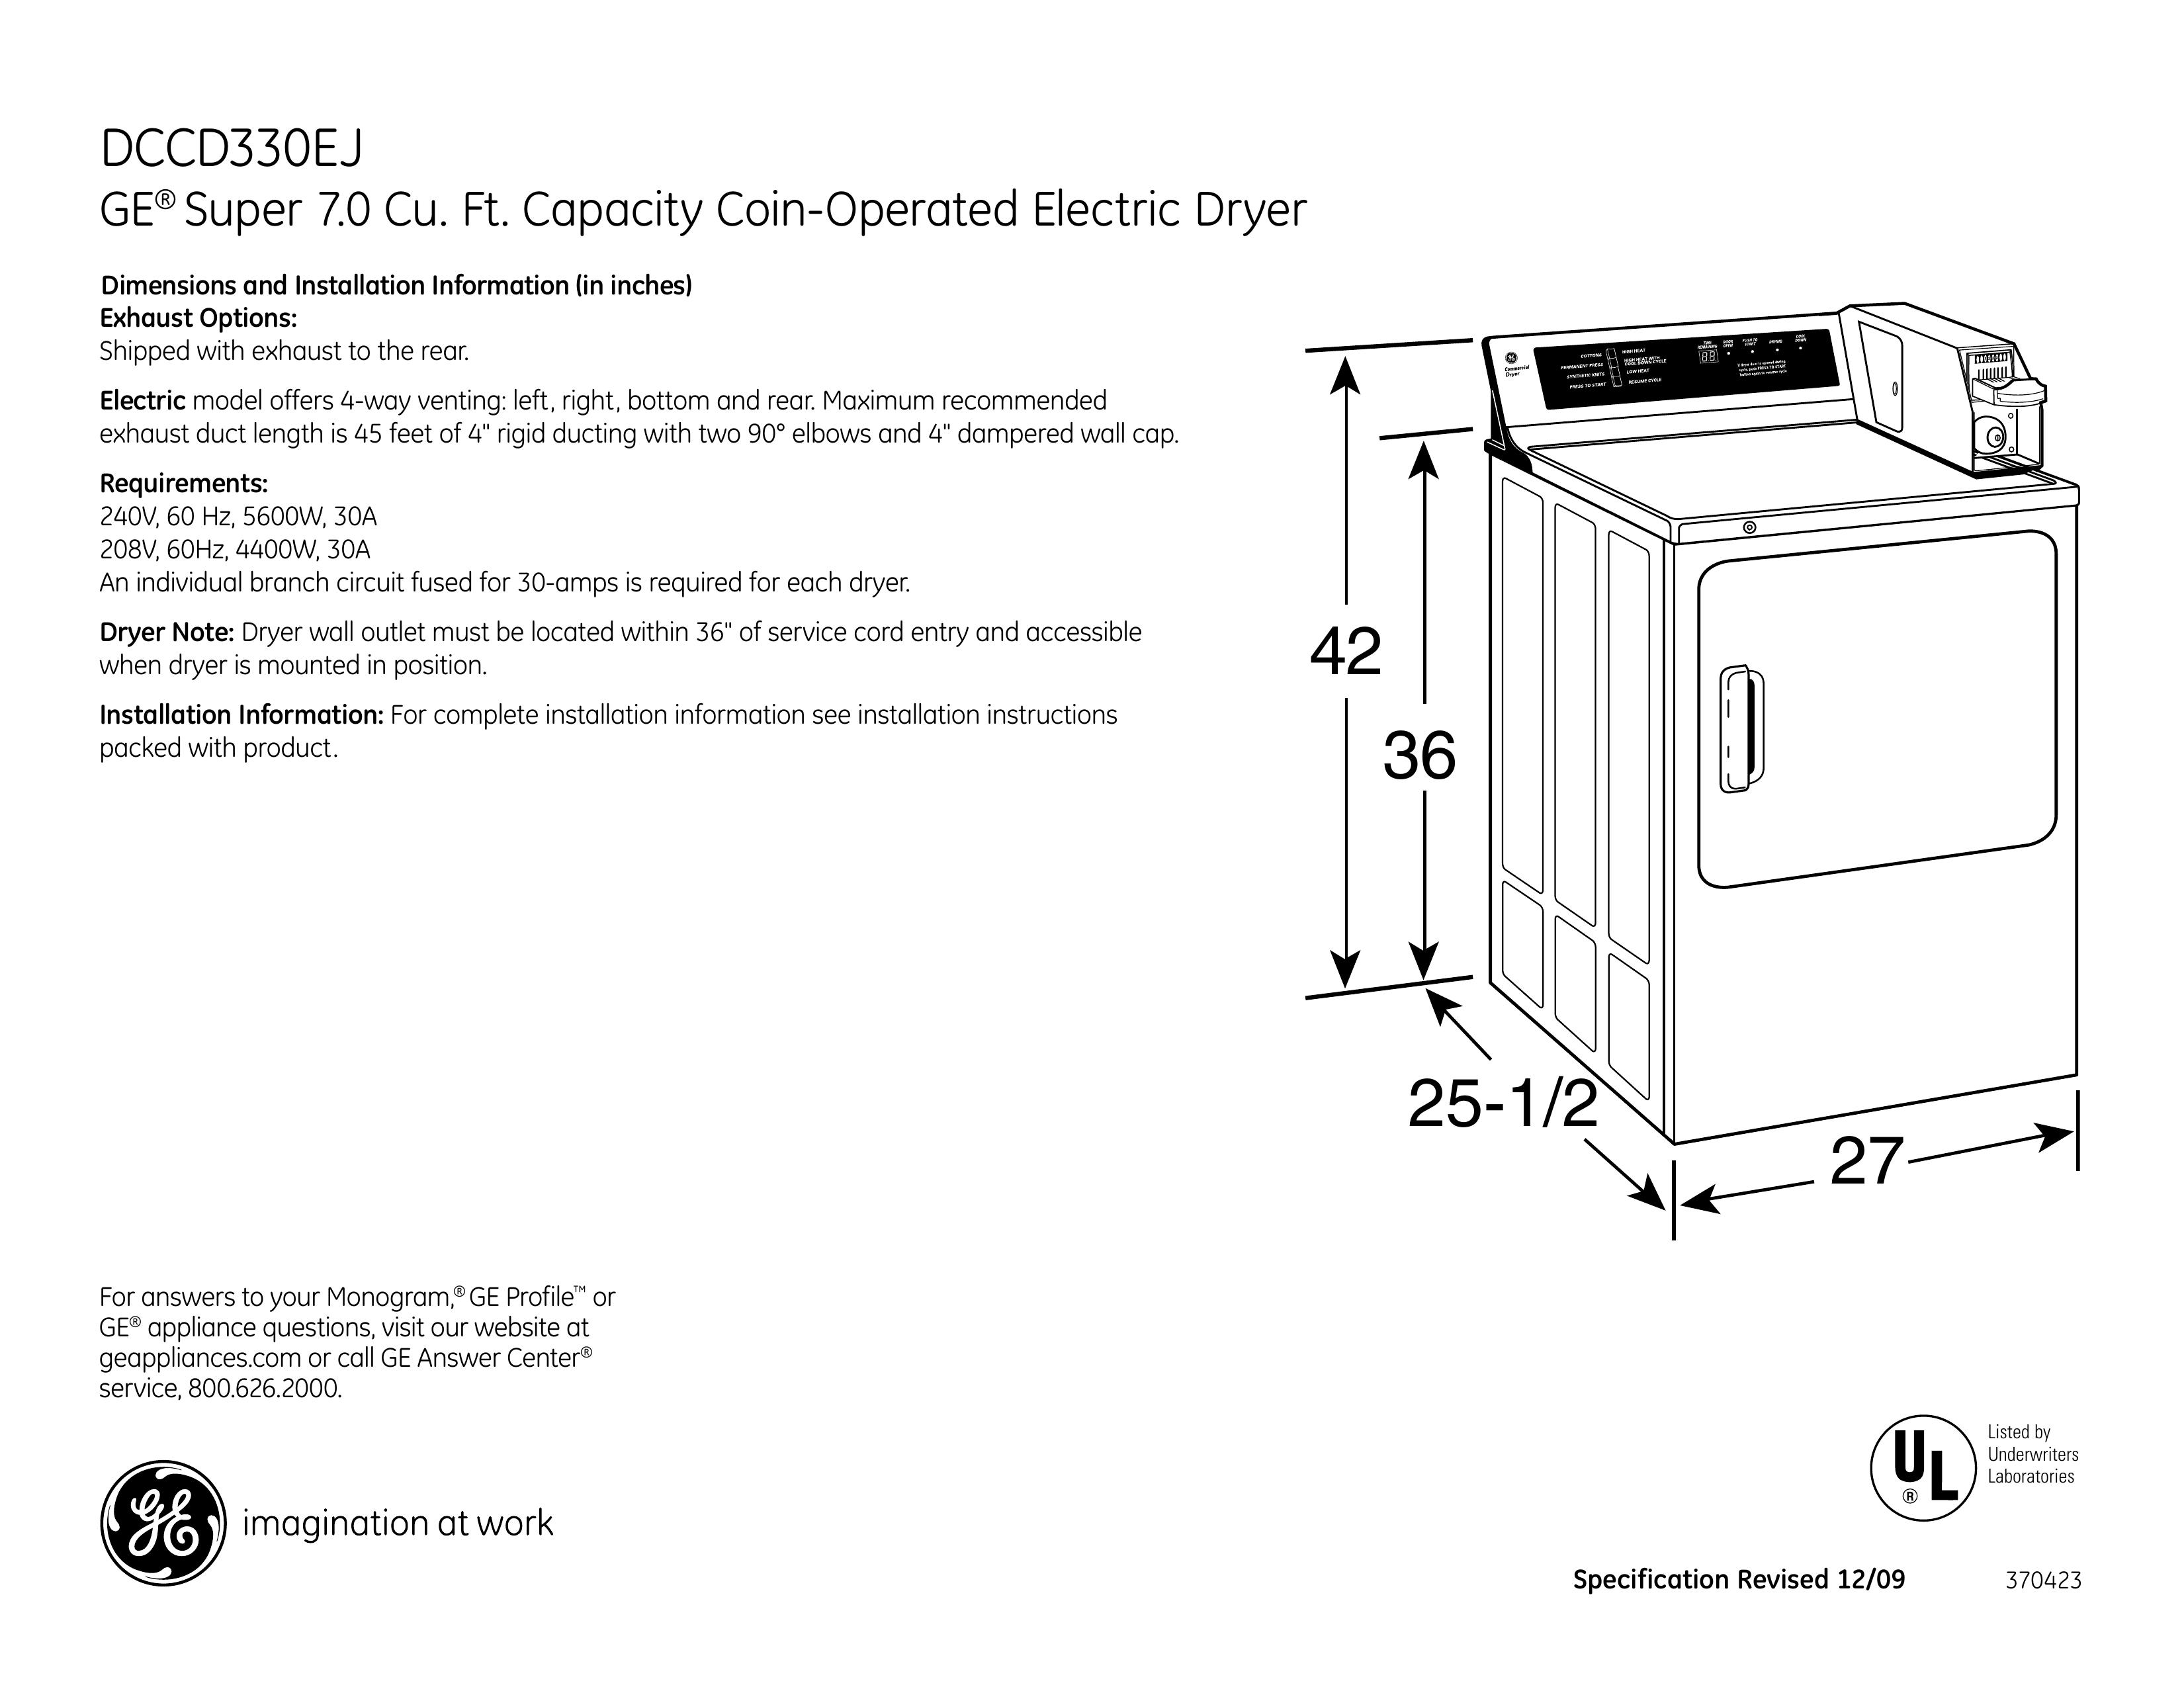 GE DCCD330EJ Washer/Dryer User Manual